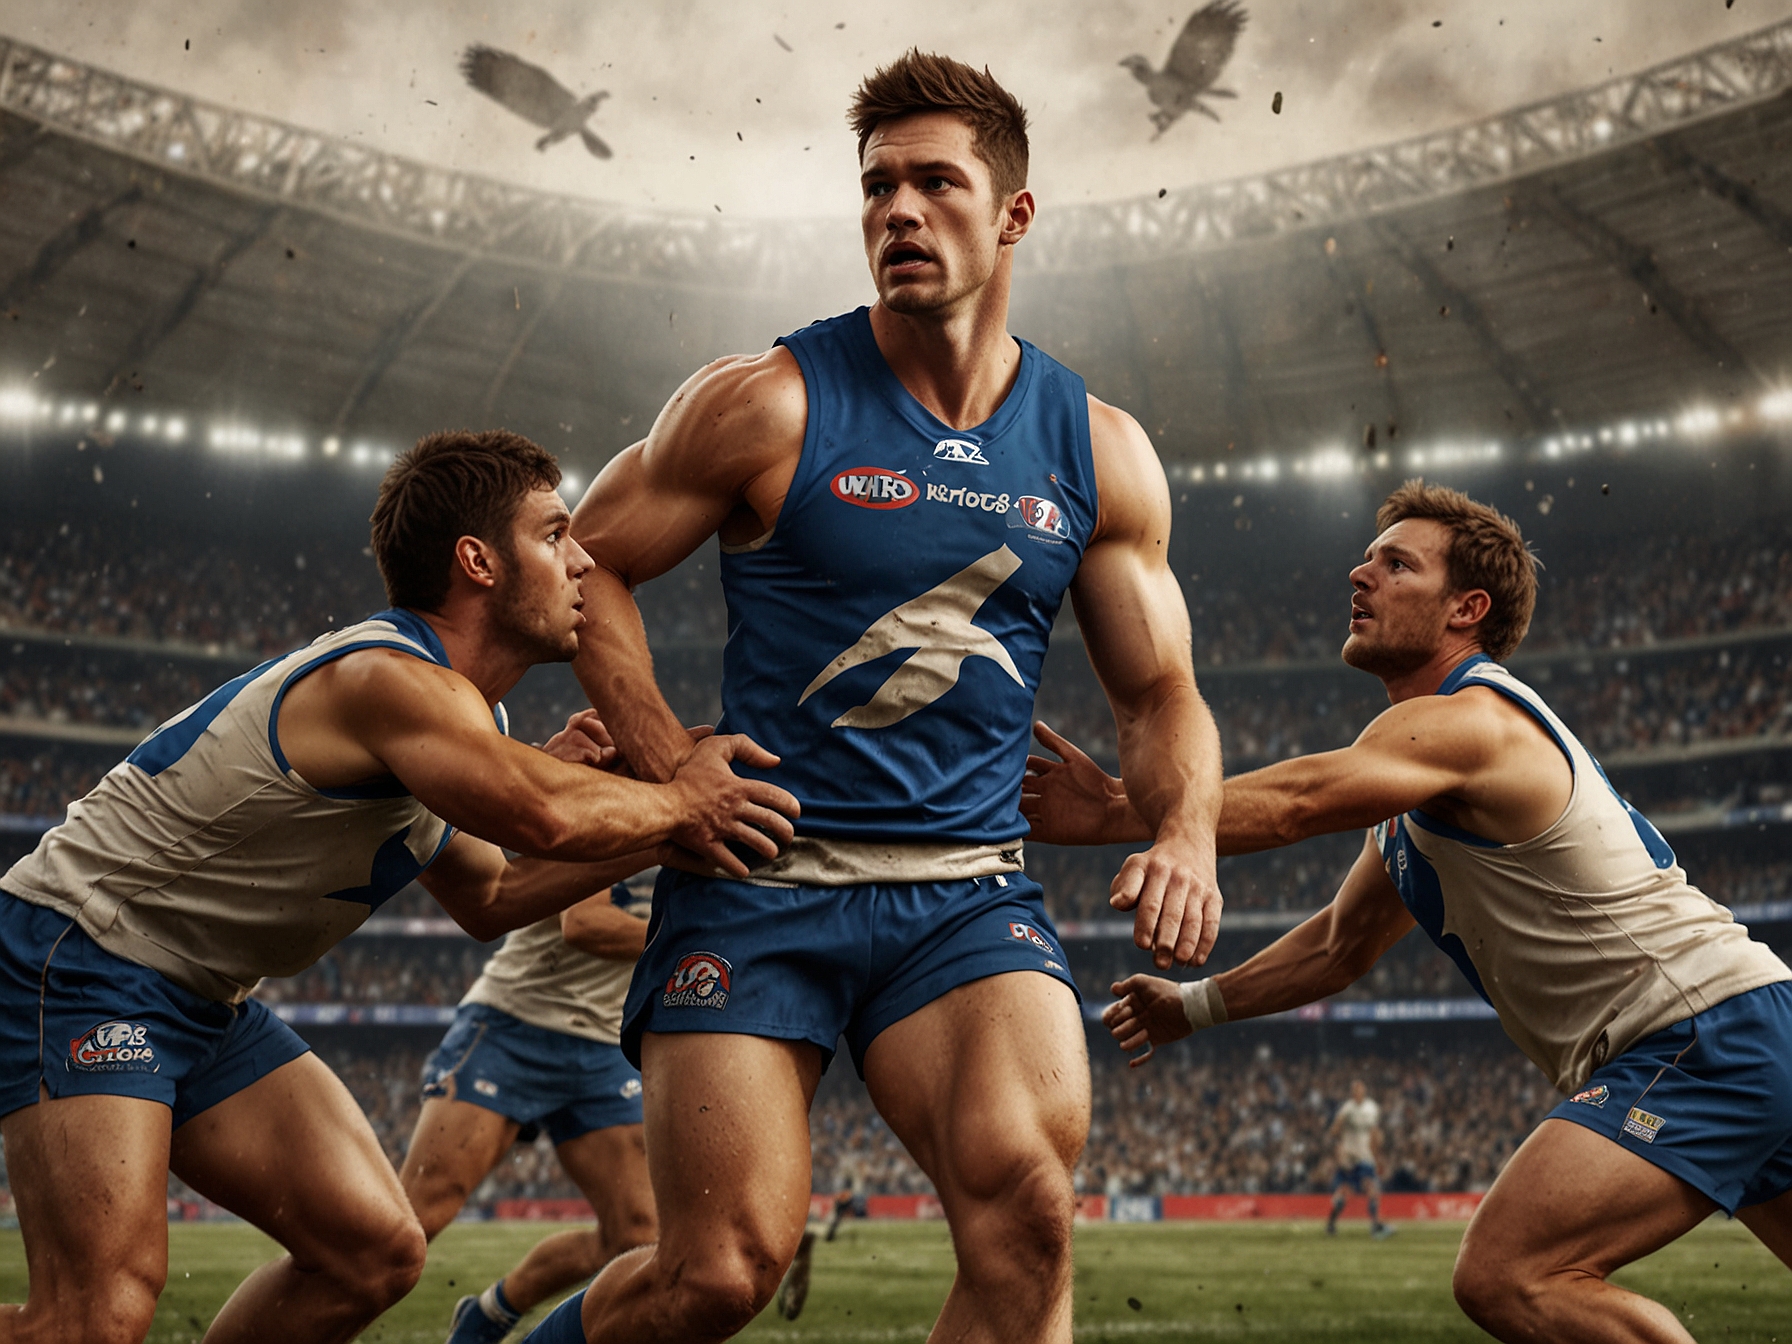 The rejuvenated Kangaroos prepare to clash with the formidable Bulldogs, showcasing their improved defense and fluid offense in a high-stakes AFL matchup.